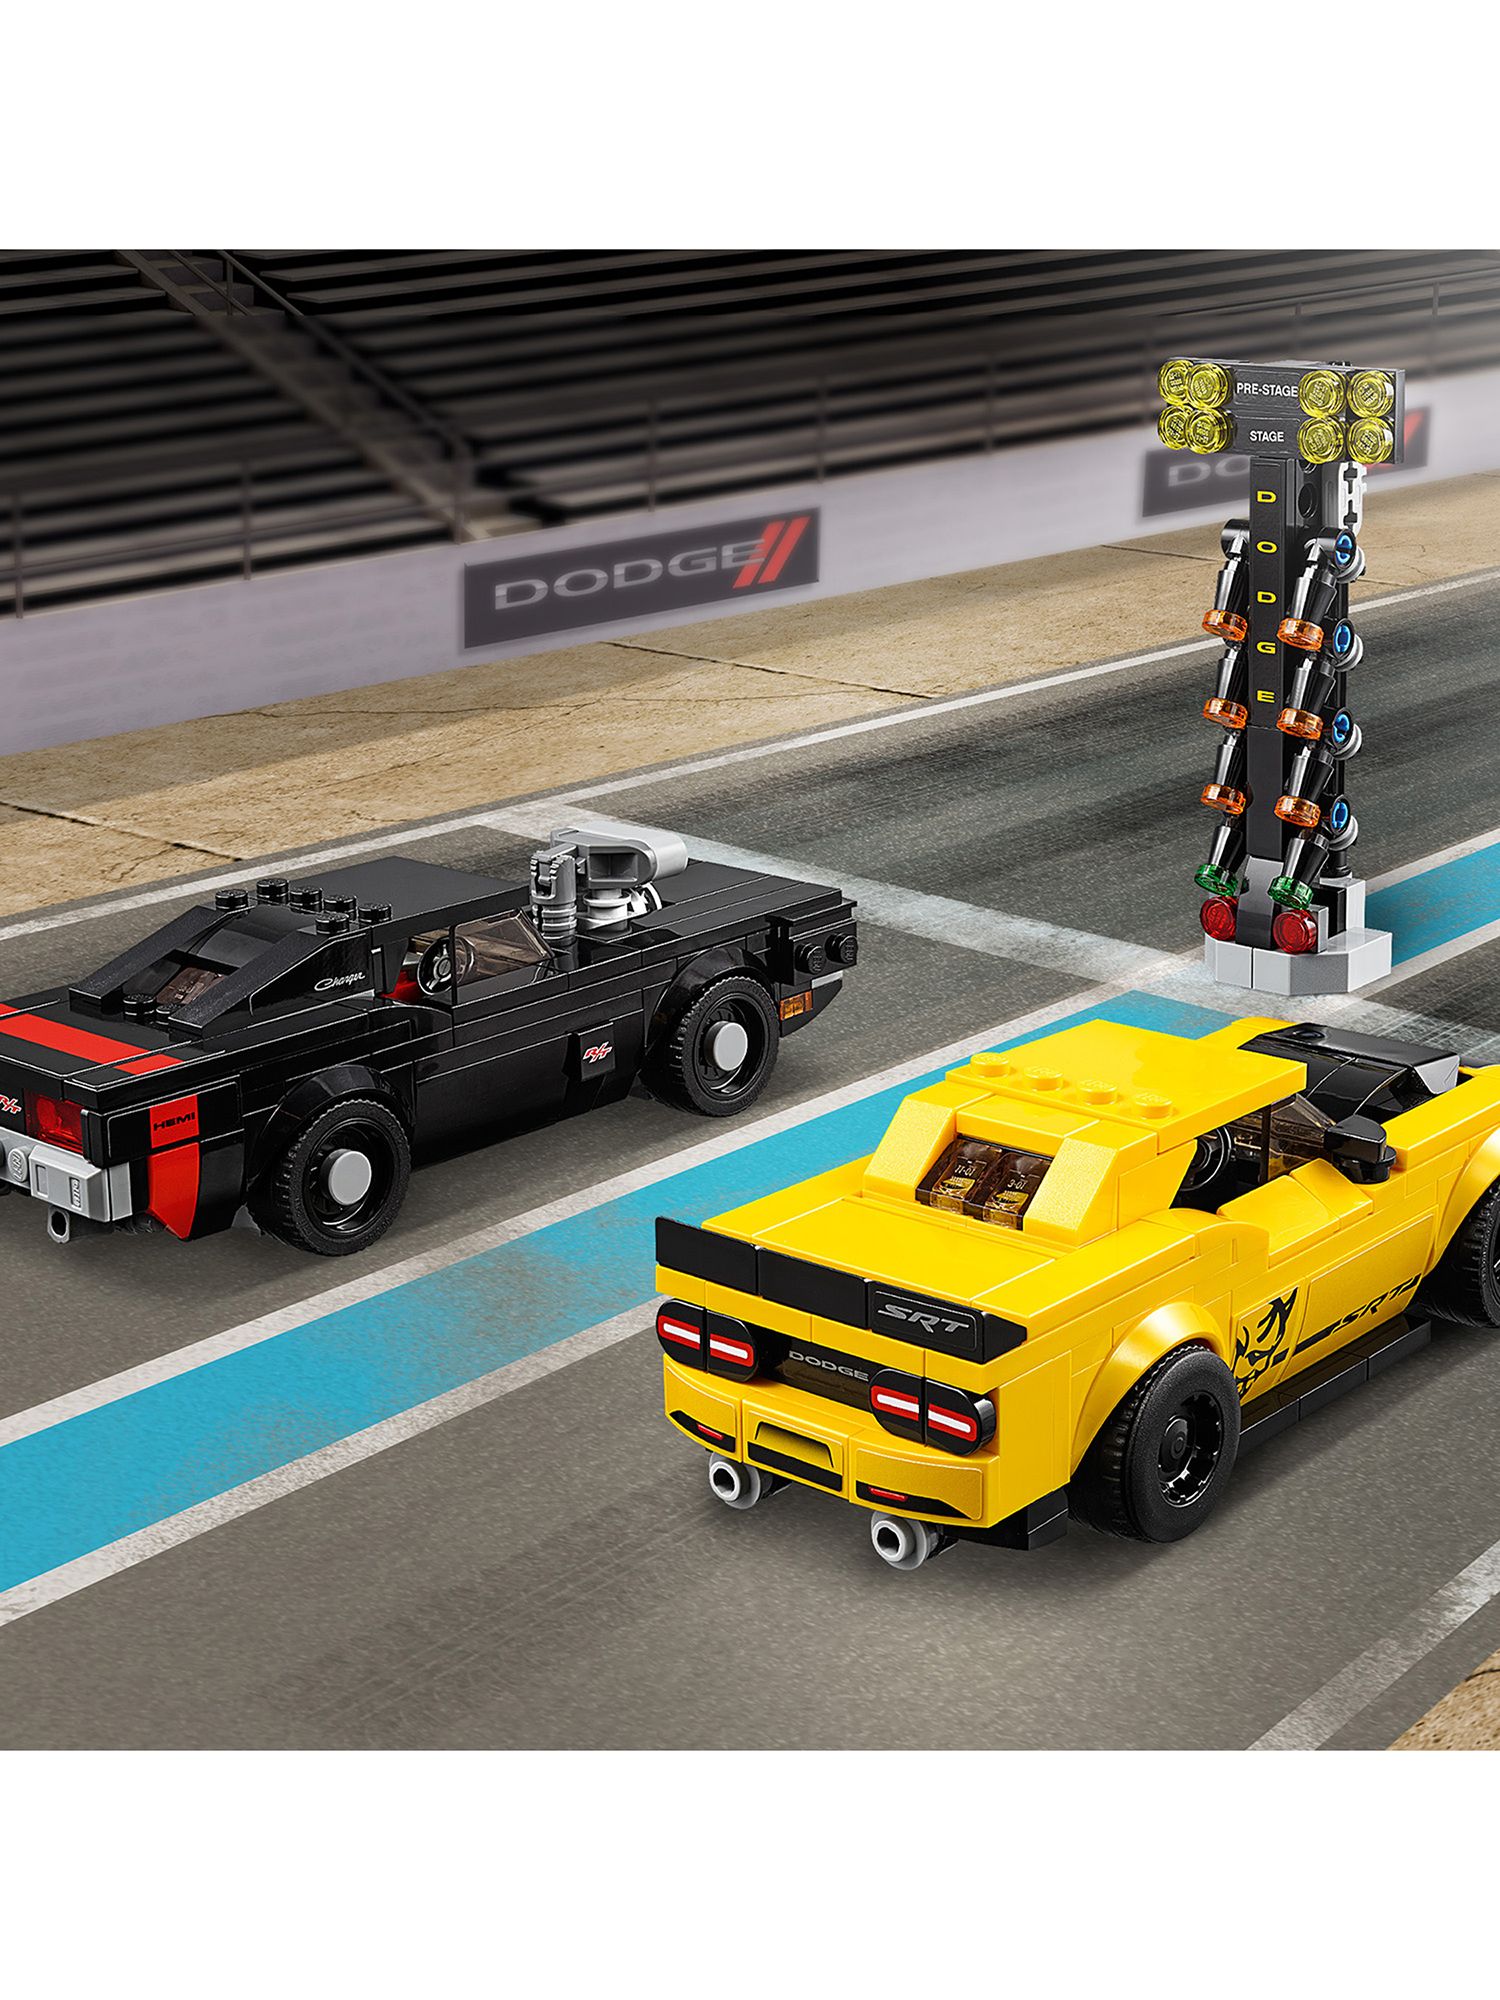 LEGO Speed Champions 75893 2018 Dodge Challenger SRT Demon and 1970 Dodge Charger R/T at John 